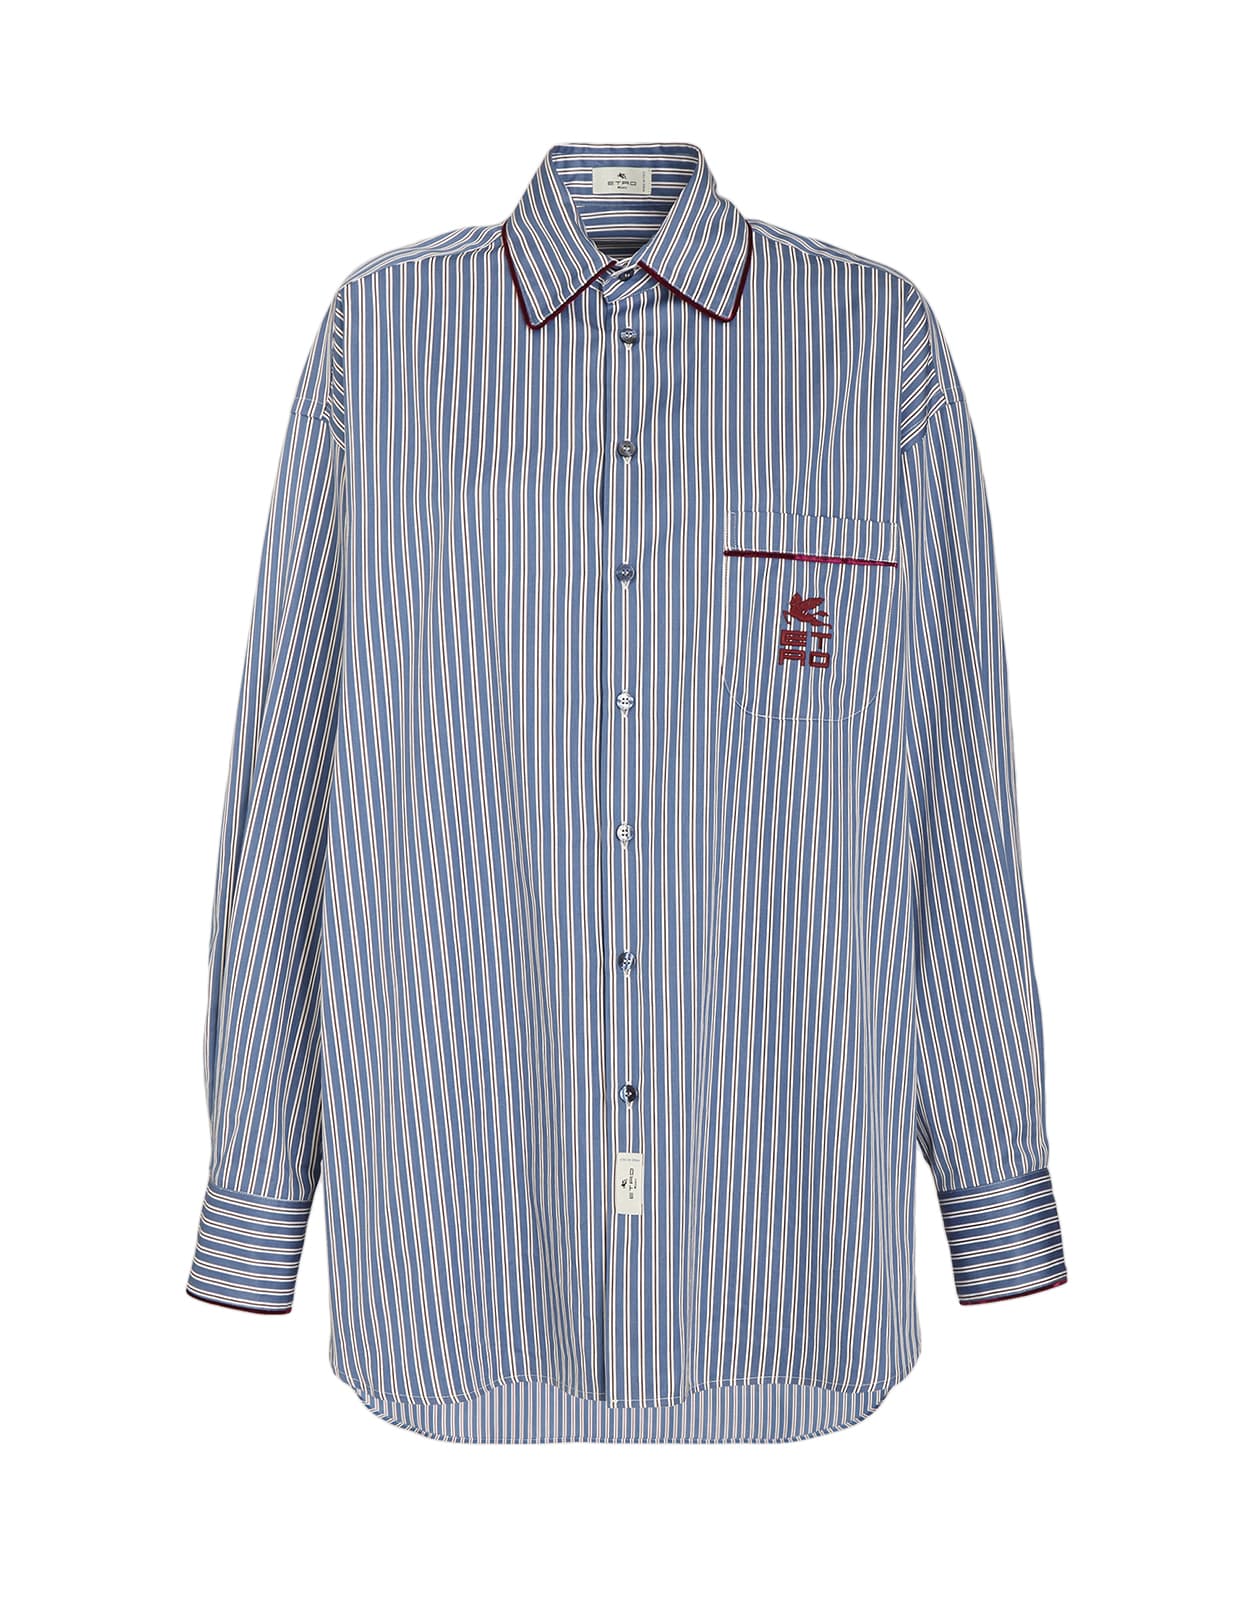 Etro Woman Striped Shirt In Light Blue Cotton With Contrast Piping